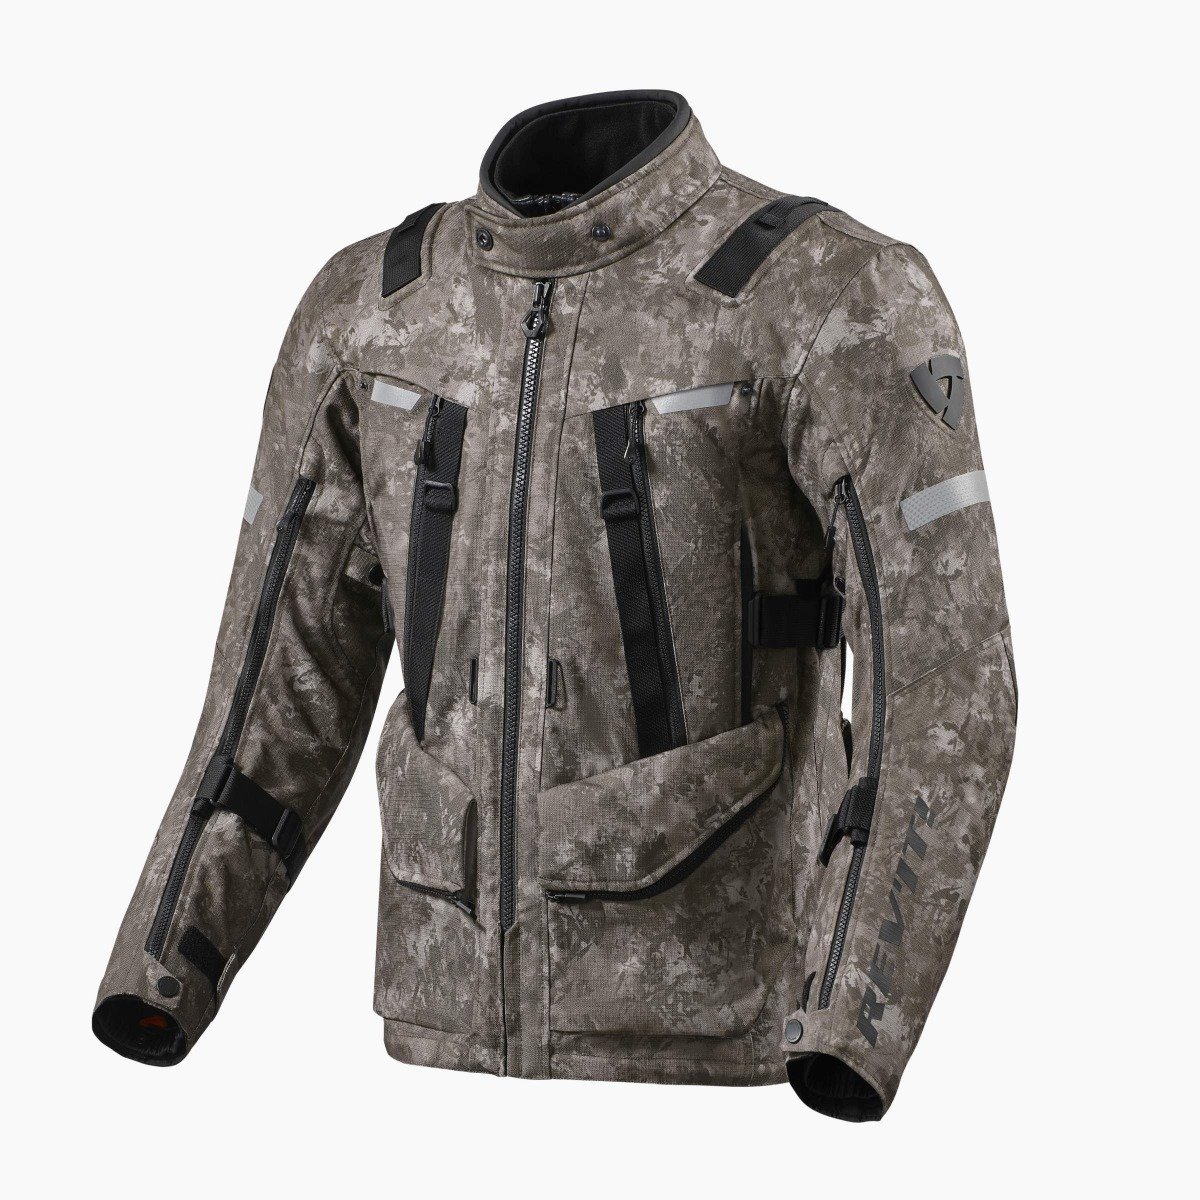 Image of REV'IT! Sand 4 H2O Jacket Camo Brown Size 2XL ID 8700001311410